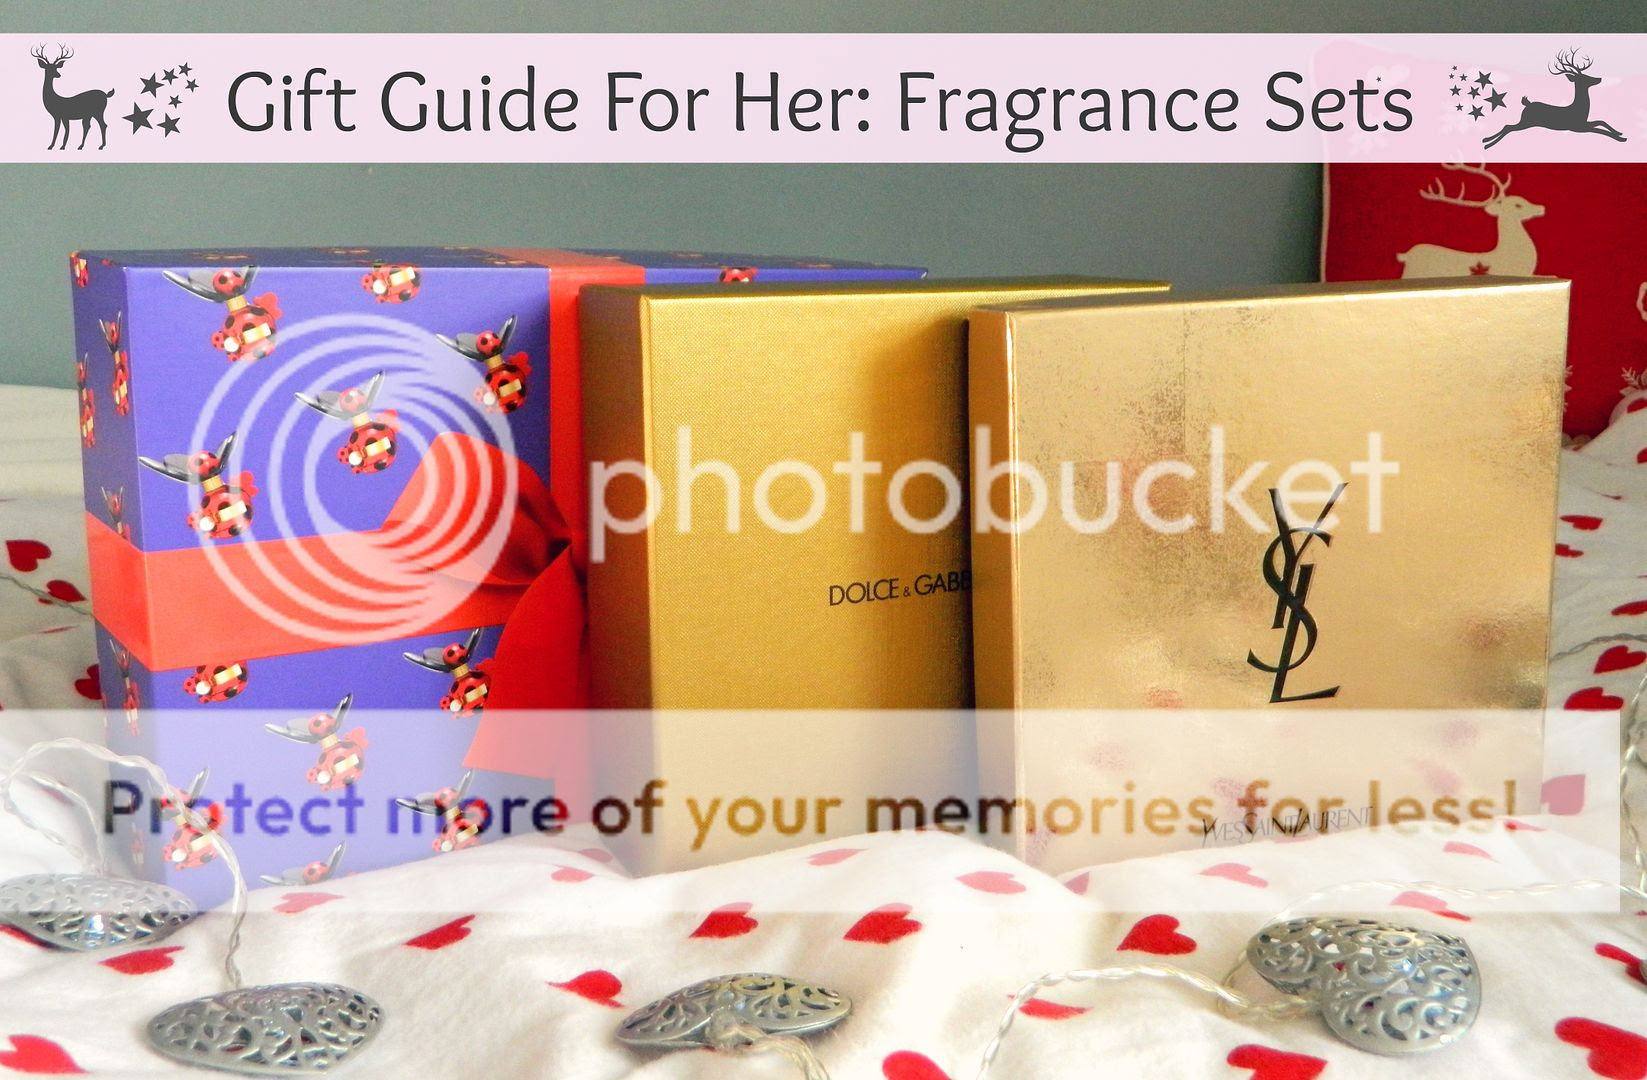 Christmas Gift Guide For Her Fragrance Sets Belle-amie UK Beauty Fashion Lifestyle Blog